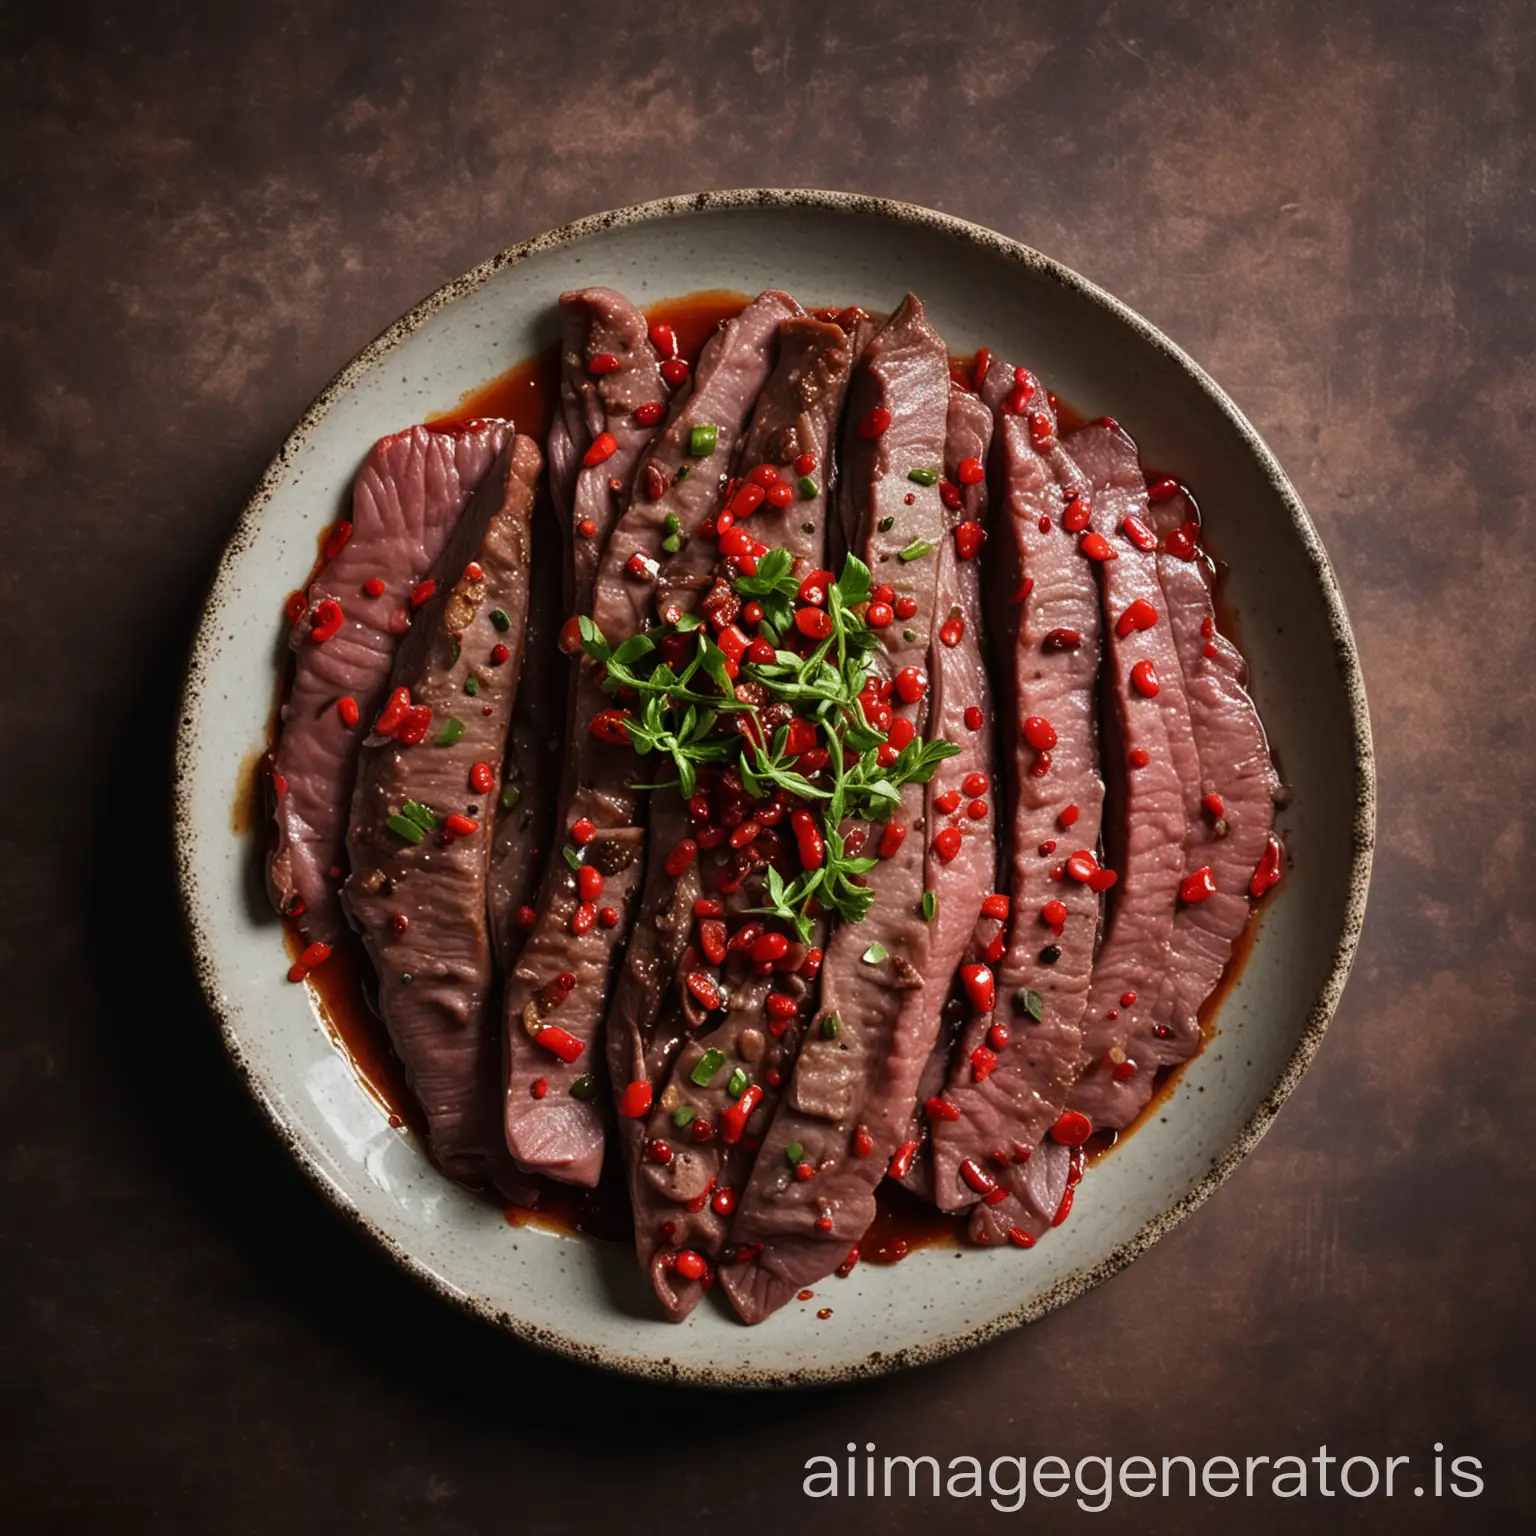 Chili pepper ox tongue, cuisine, large portion, delicious, beautiful, with light and shadow